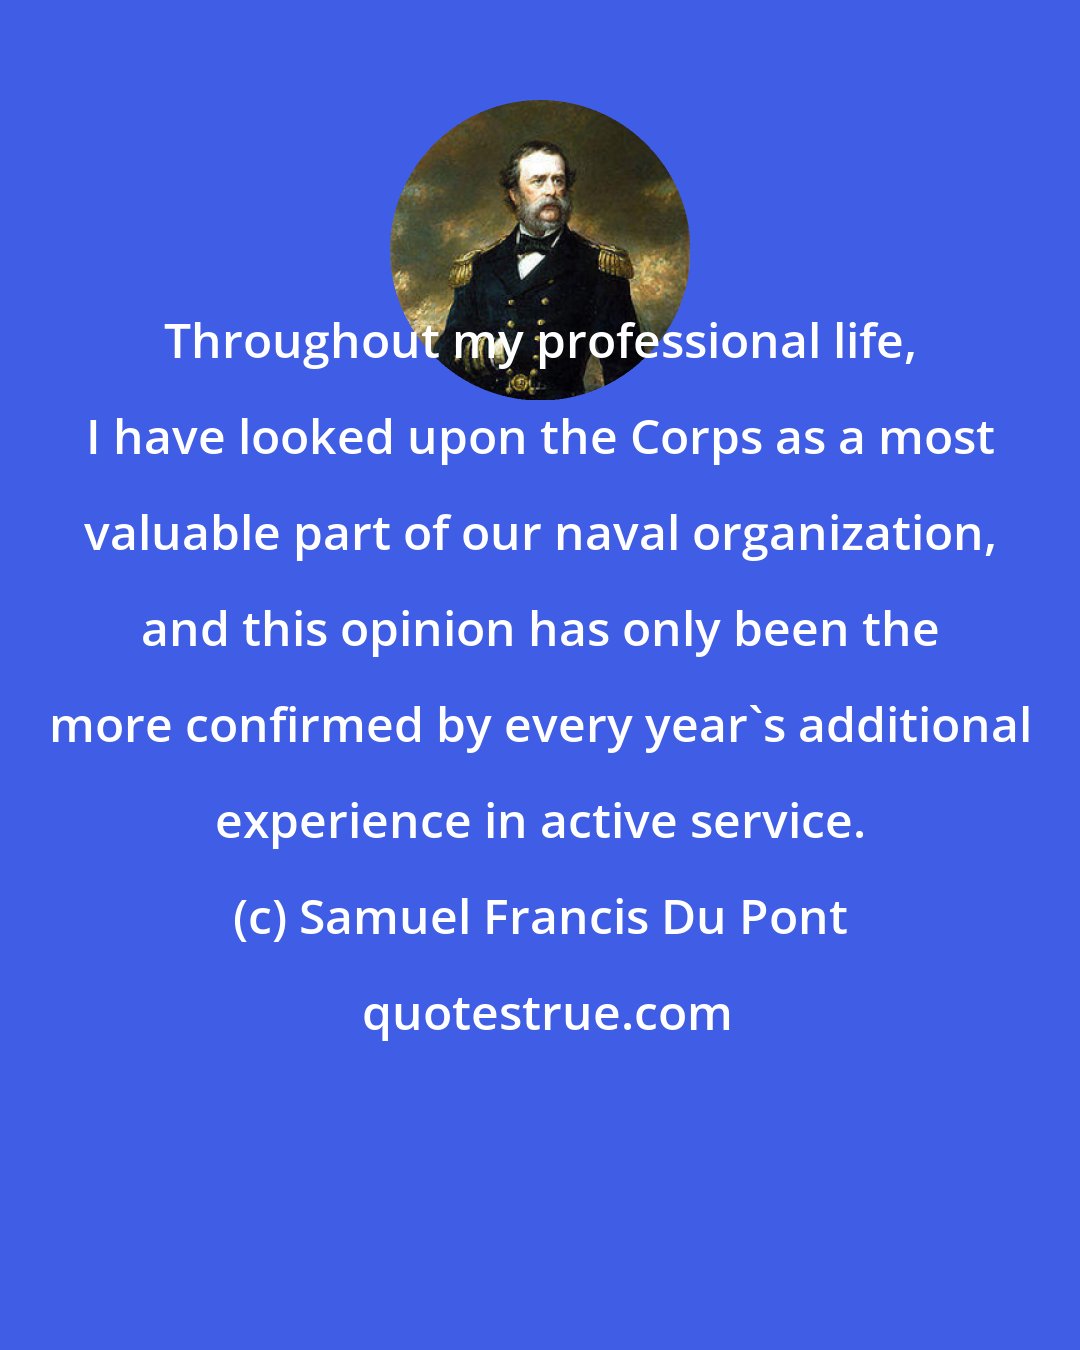 Samuel Francis Du Pont: Throughout my professional life, I have looked upon the Corps as a most valuable part of our naval organization, and this opinion has only been the more confirmed by every year's additional experience in active service.